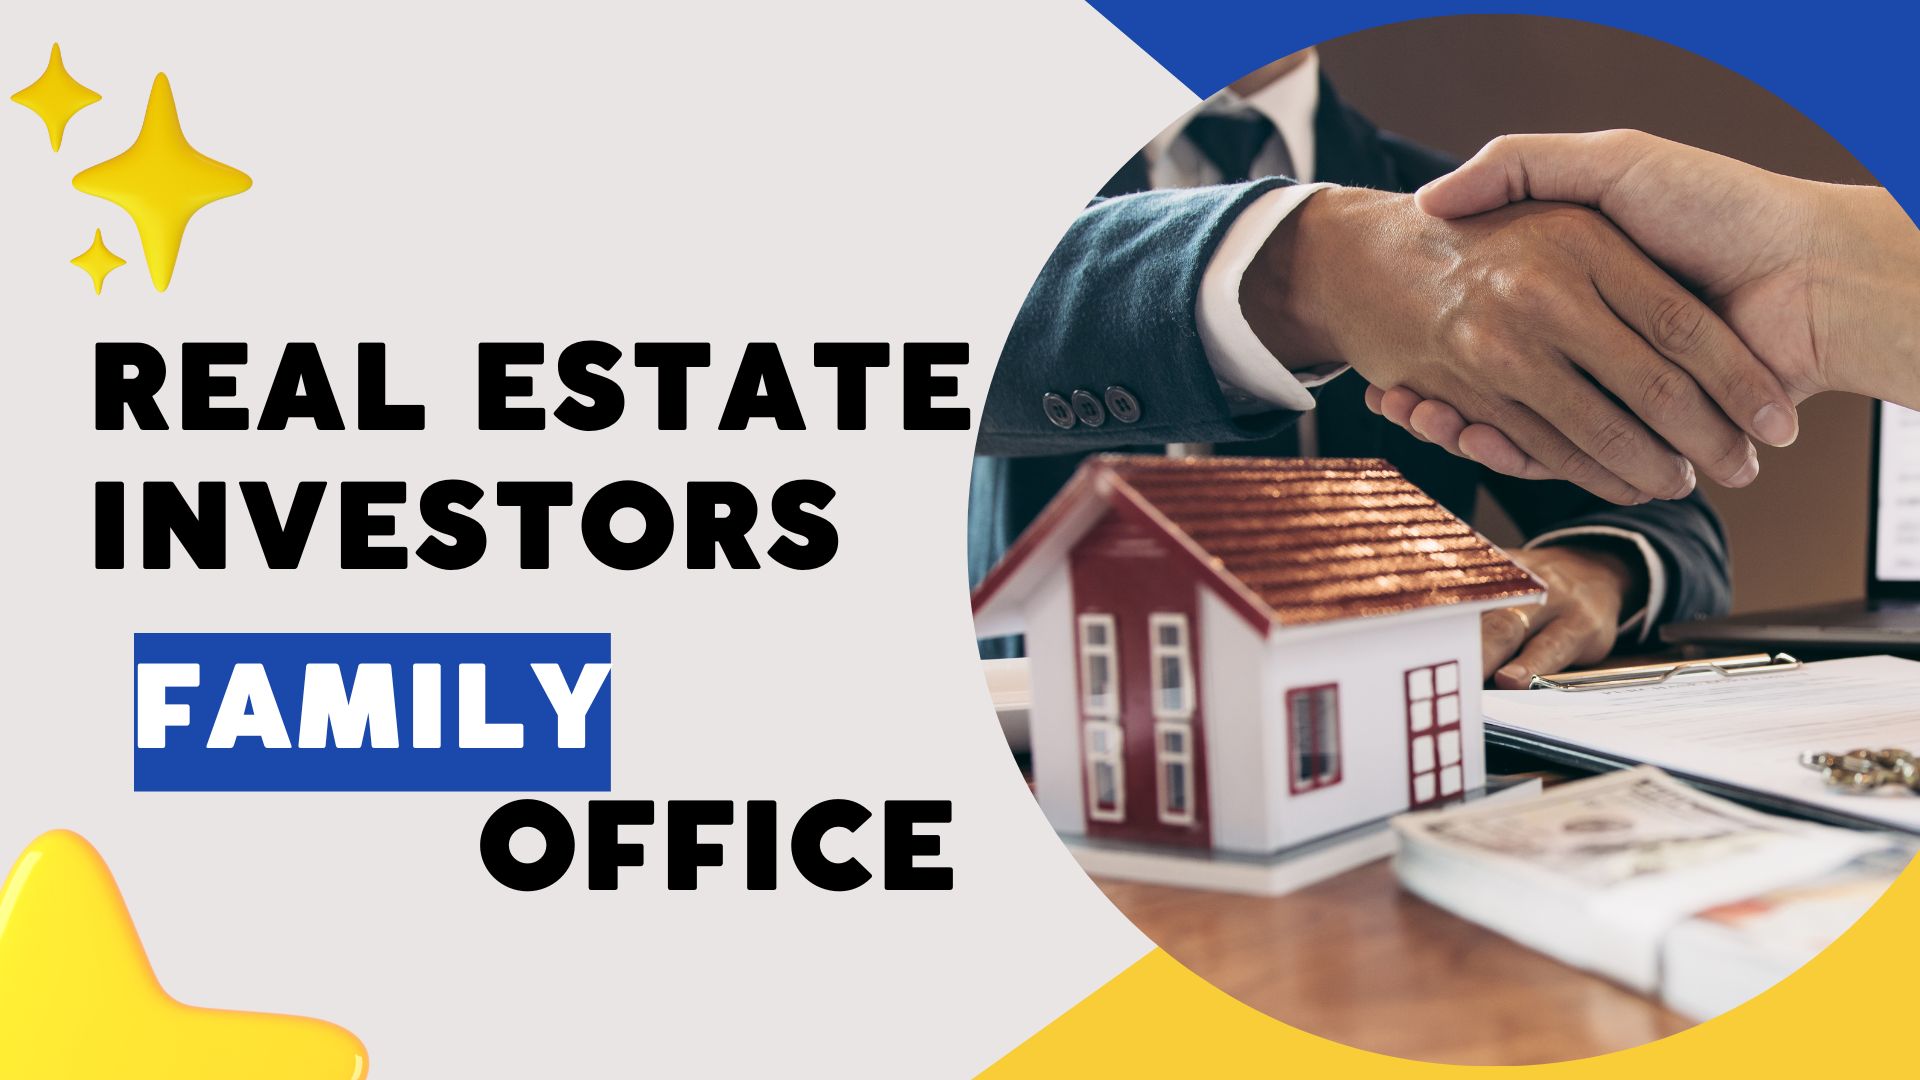 Family Office Real Estate Investors